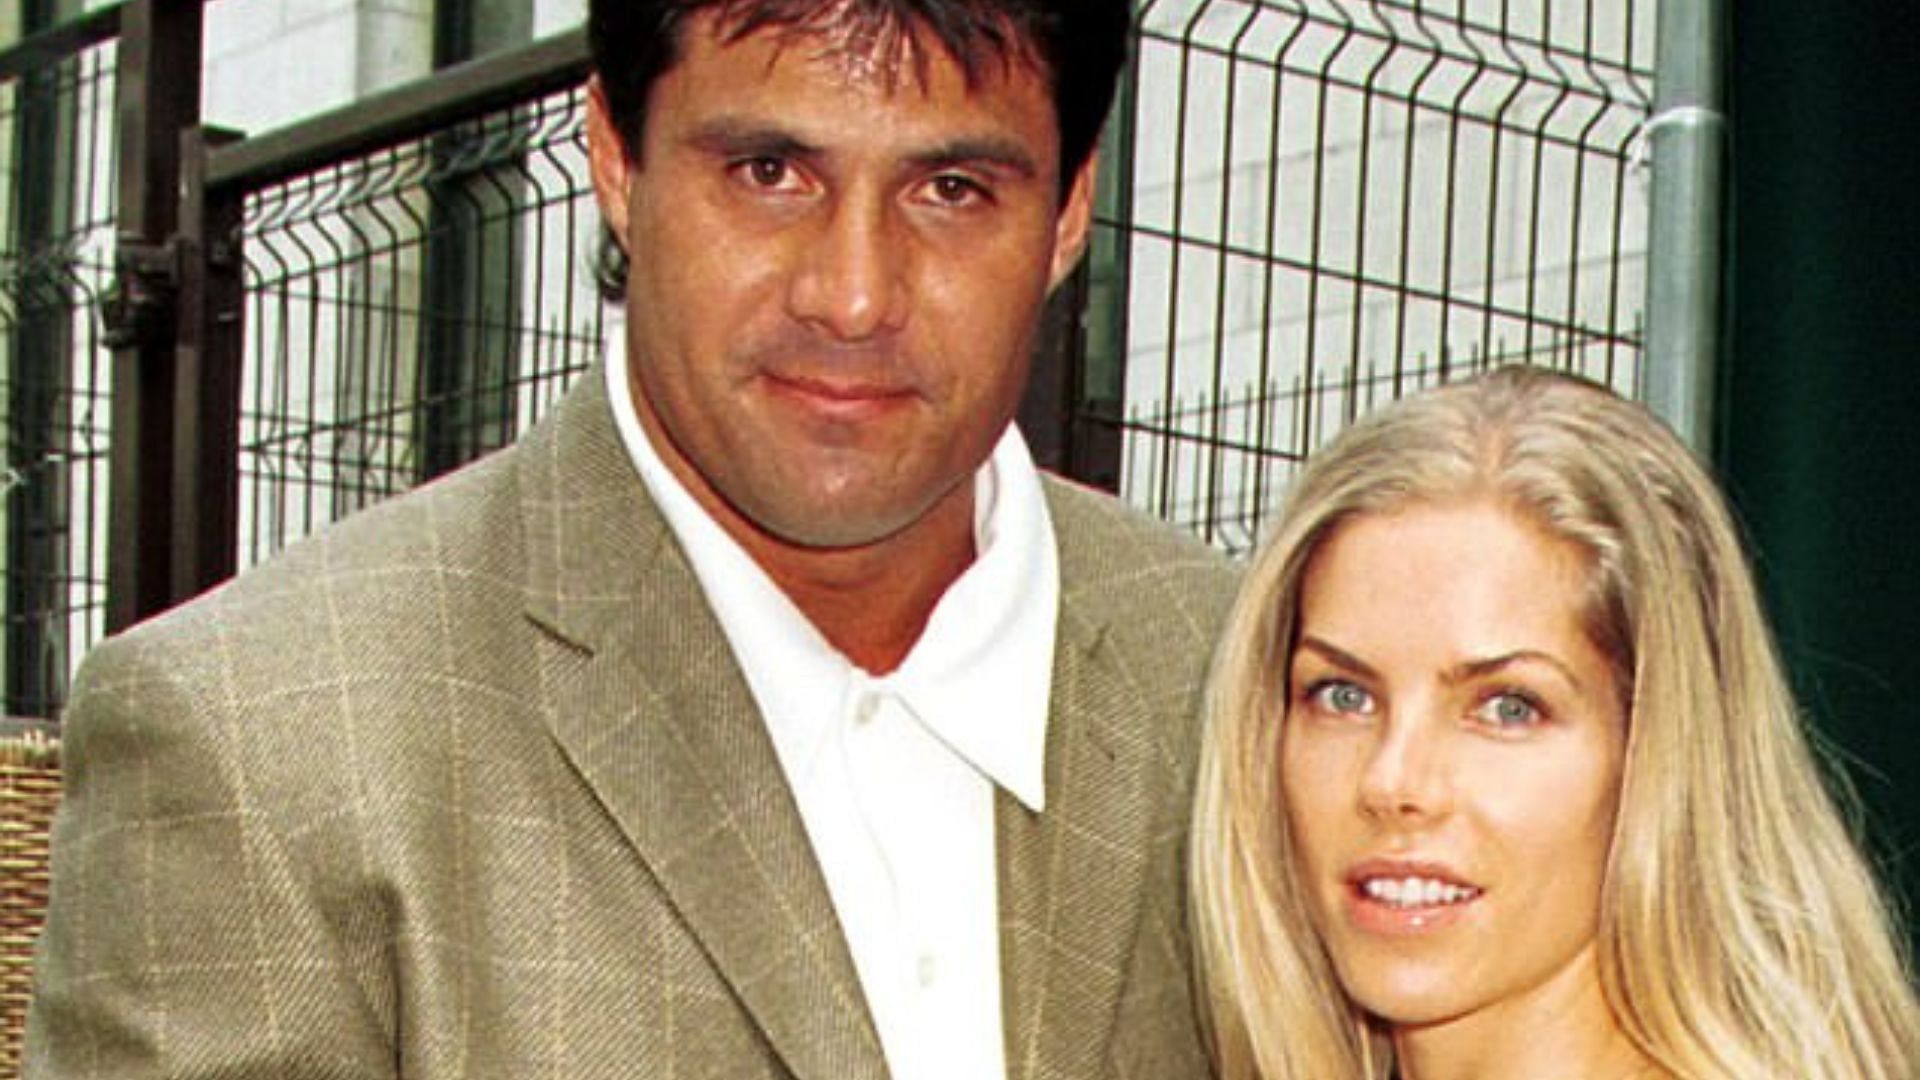 Jose Canseco and his ex-wife, Jessica Canseco